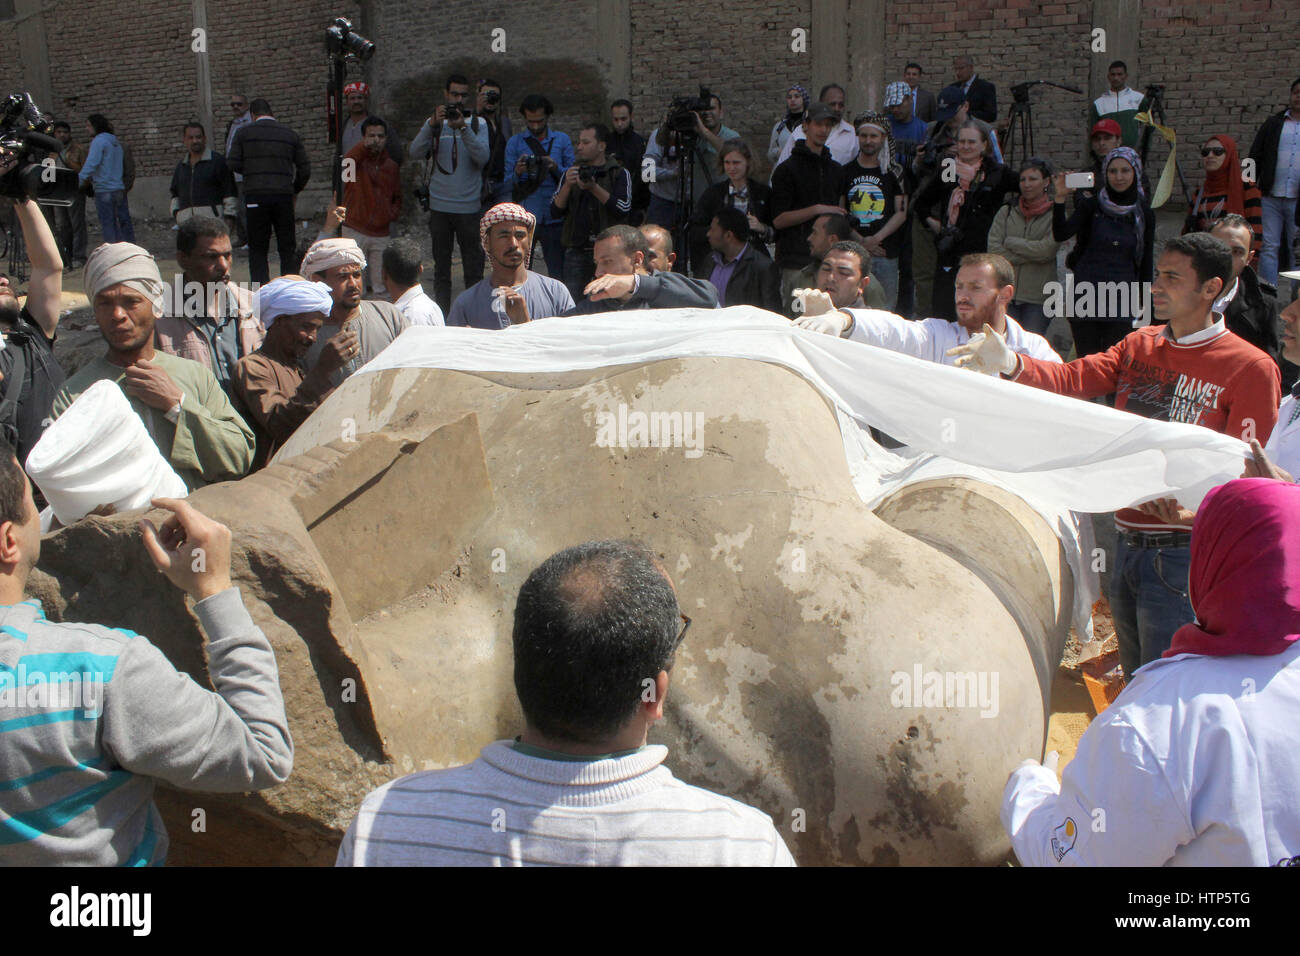 Cairo, Egypt. 14th Mar, 2017. A team of Egyptian and German archeologists pulled out parts of a massive statue, believed to depict Rameses II, one of ancient Egypt's most powerful pharaohs, in al-Matariya neighbourhood in Cairo, Egypt, 14 March 2017. Photo: Nehal El-Sherif/dpa/Alamy Live News Stock Photo